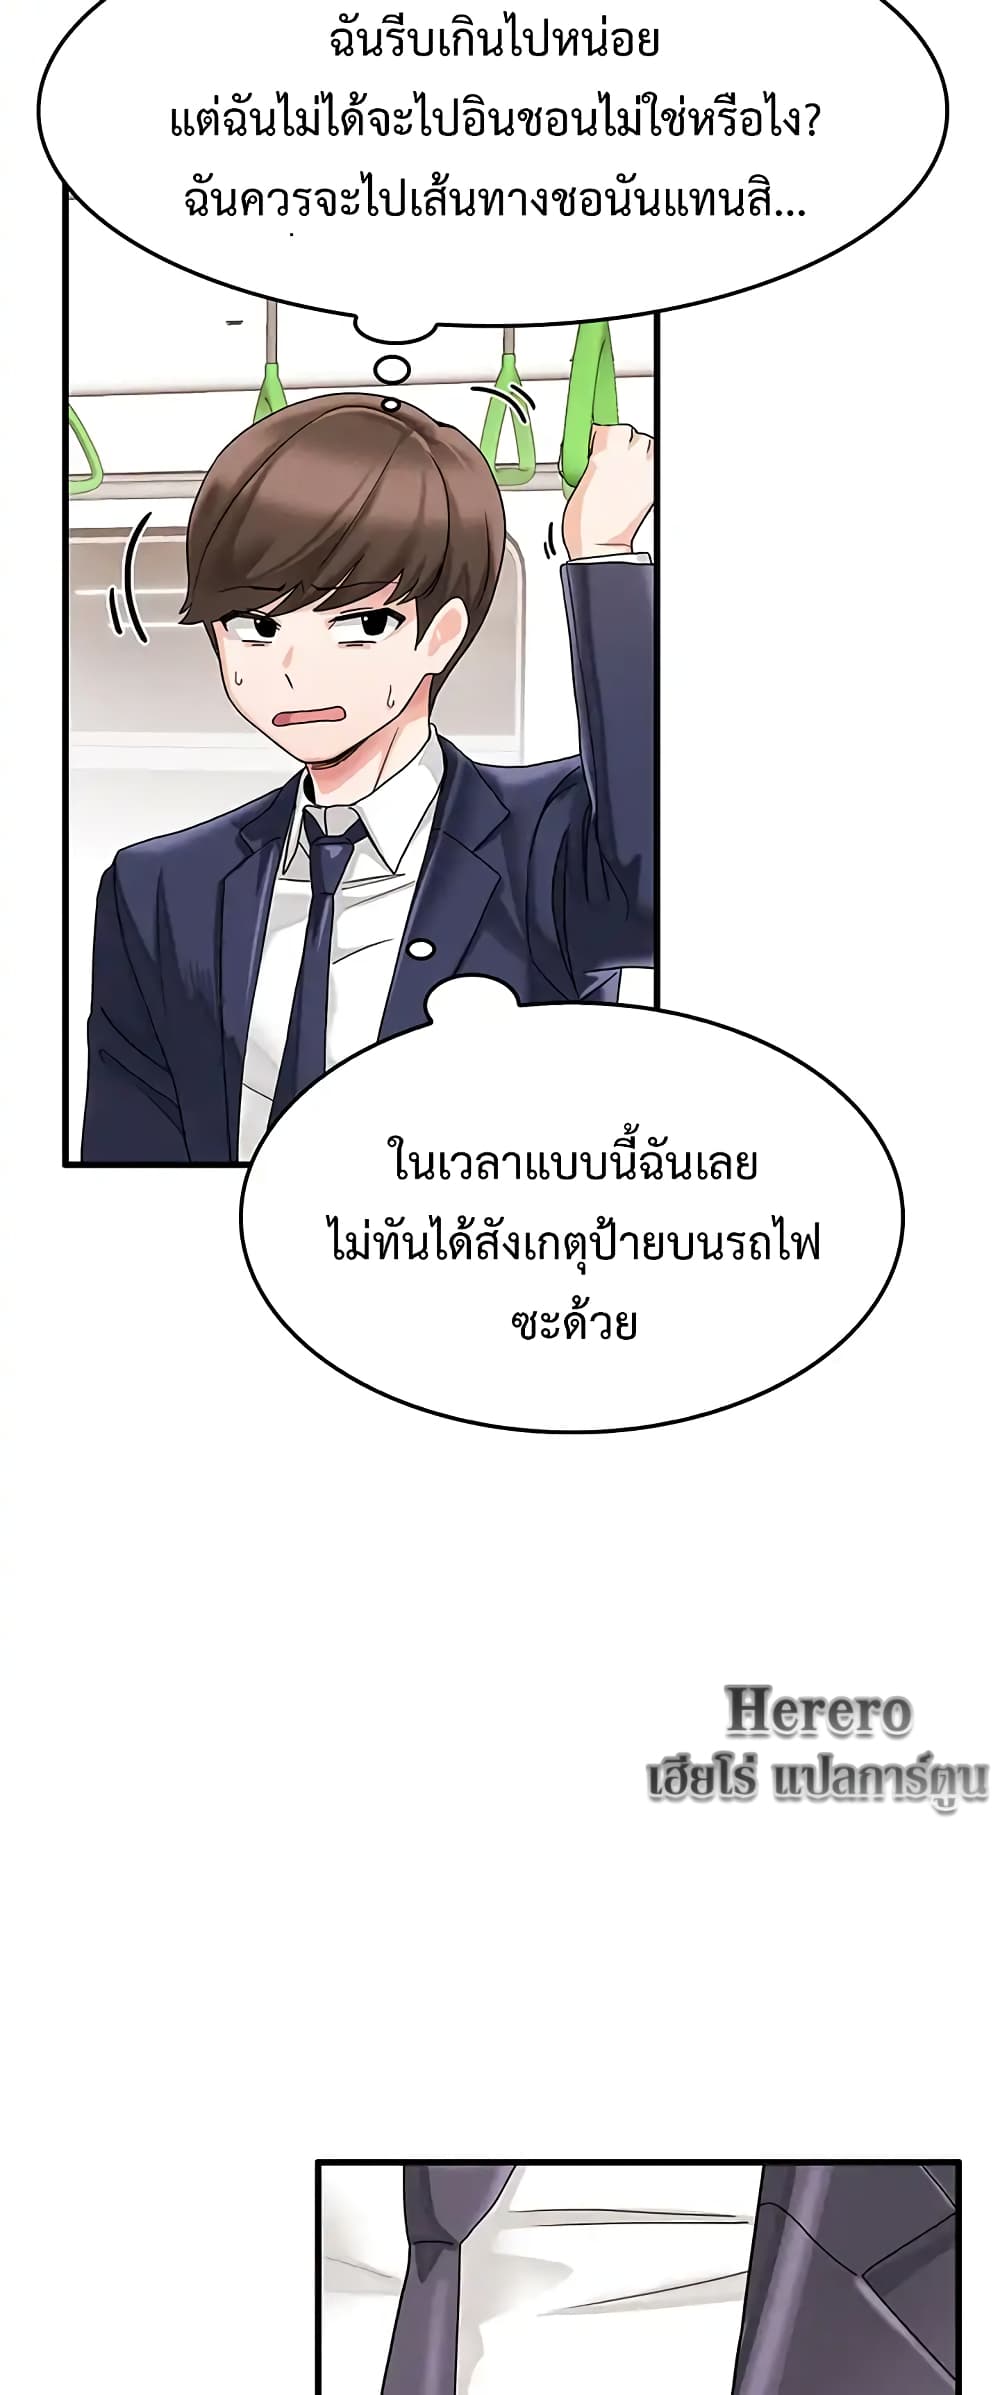 Relationship Reverse Button: Let’s Make Her Submissive 1 ภาพที่ 6